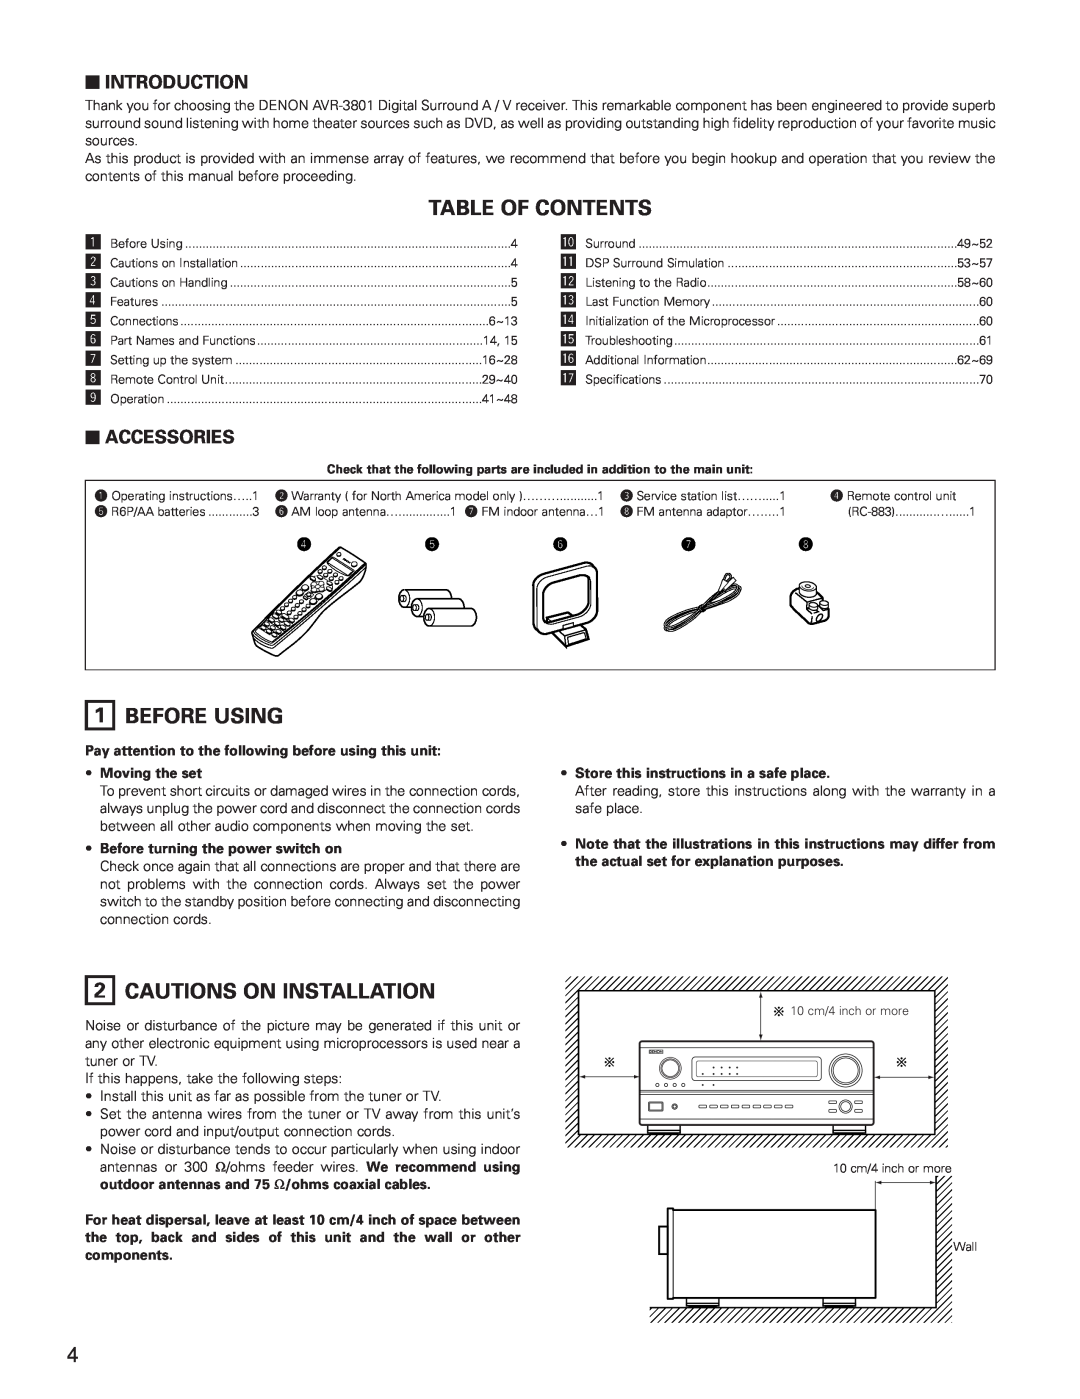 Denon AVR-3801 Table Of Contents, Before Using, Cautions On Installation, 2INTRODUCTION, 2ACCESSORIES, Moving the set 